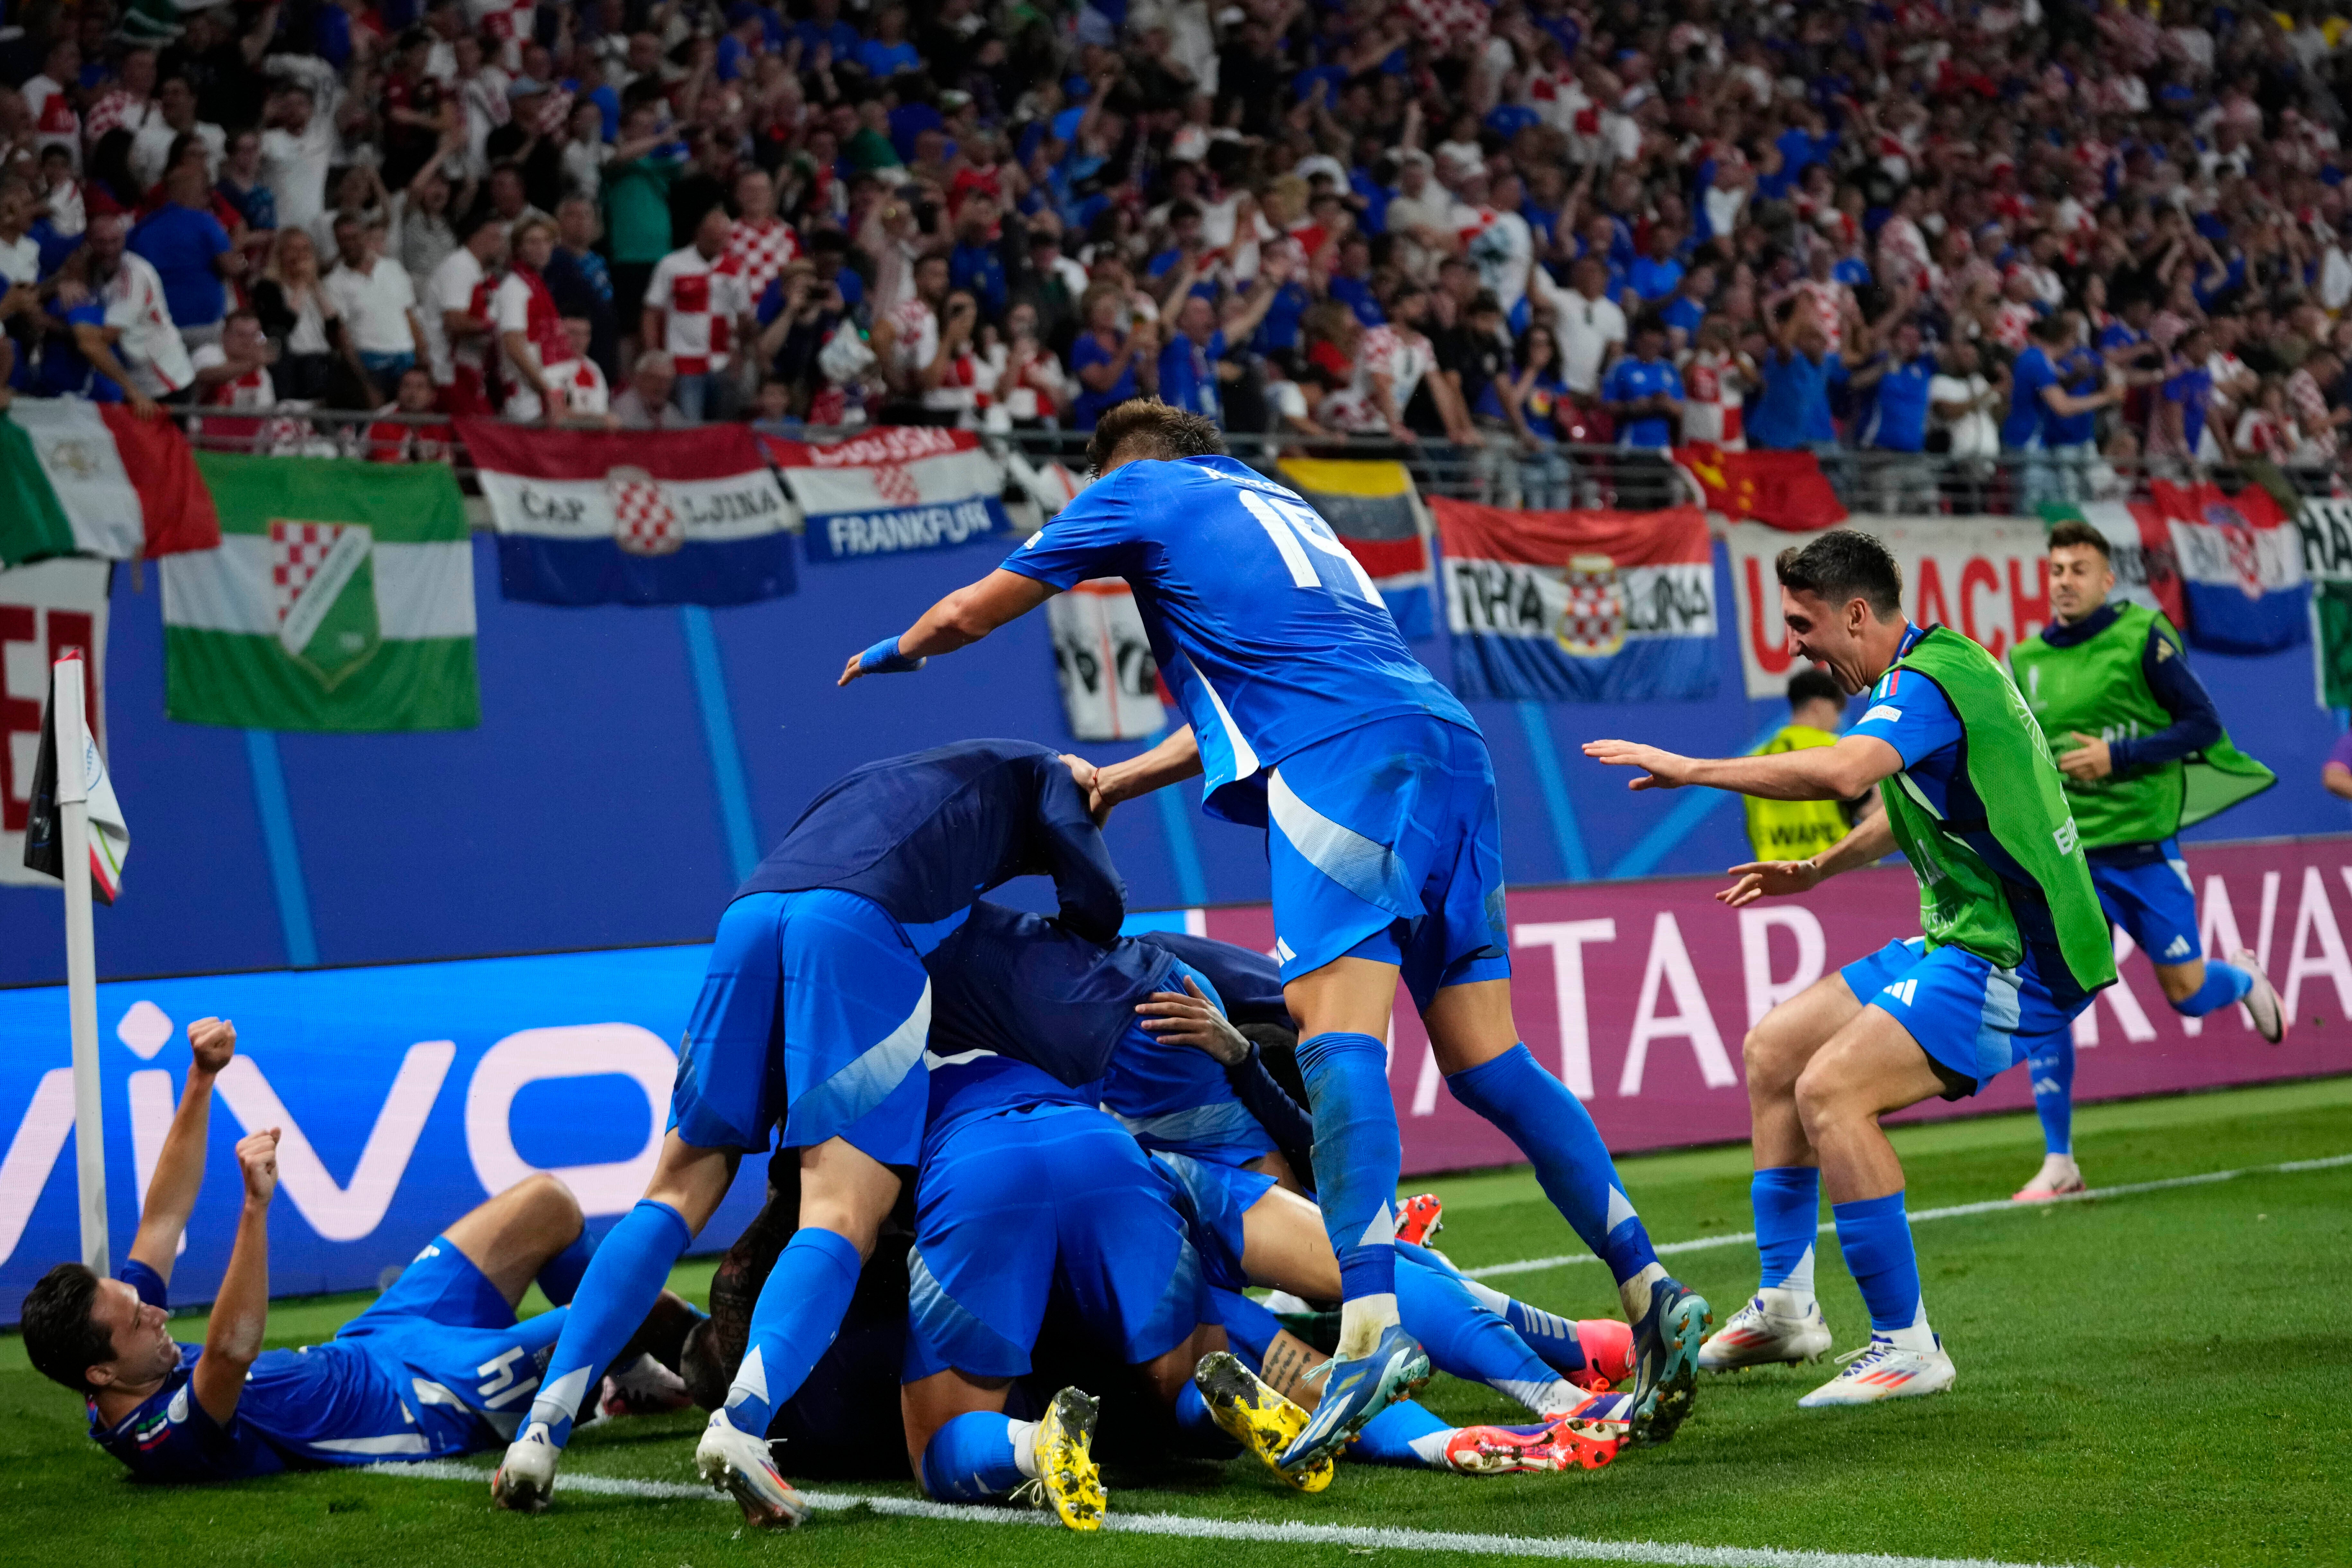 Italy knocked out Croatia with the last kick of the game